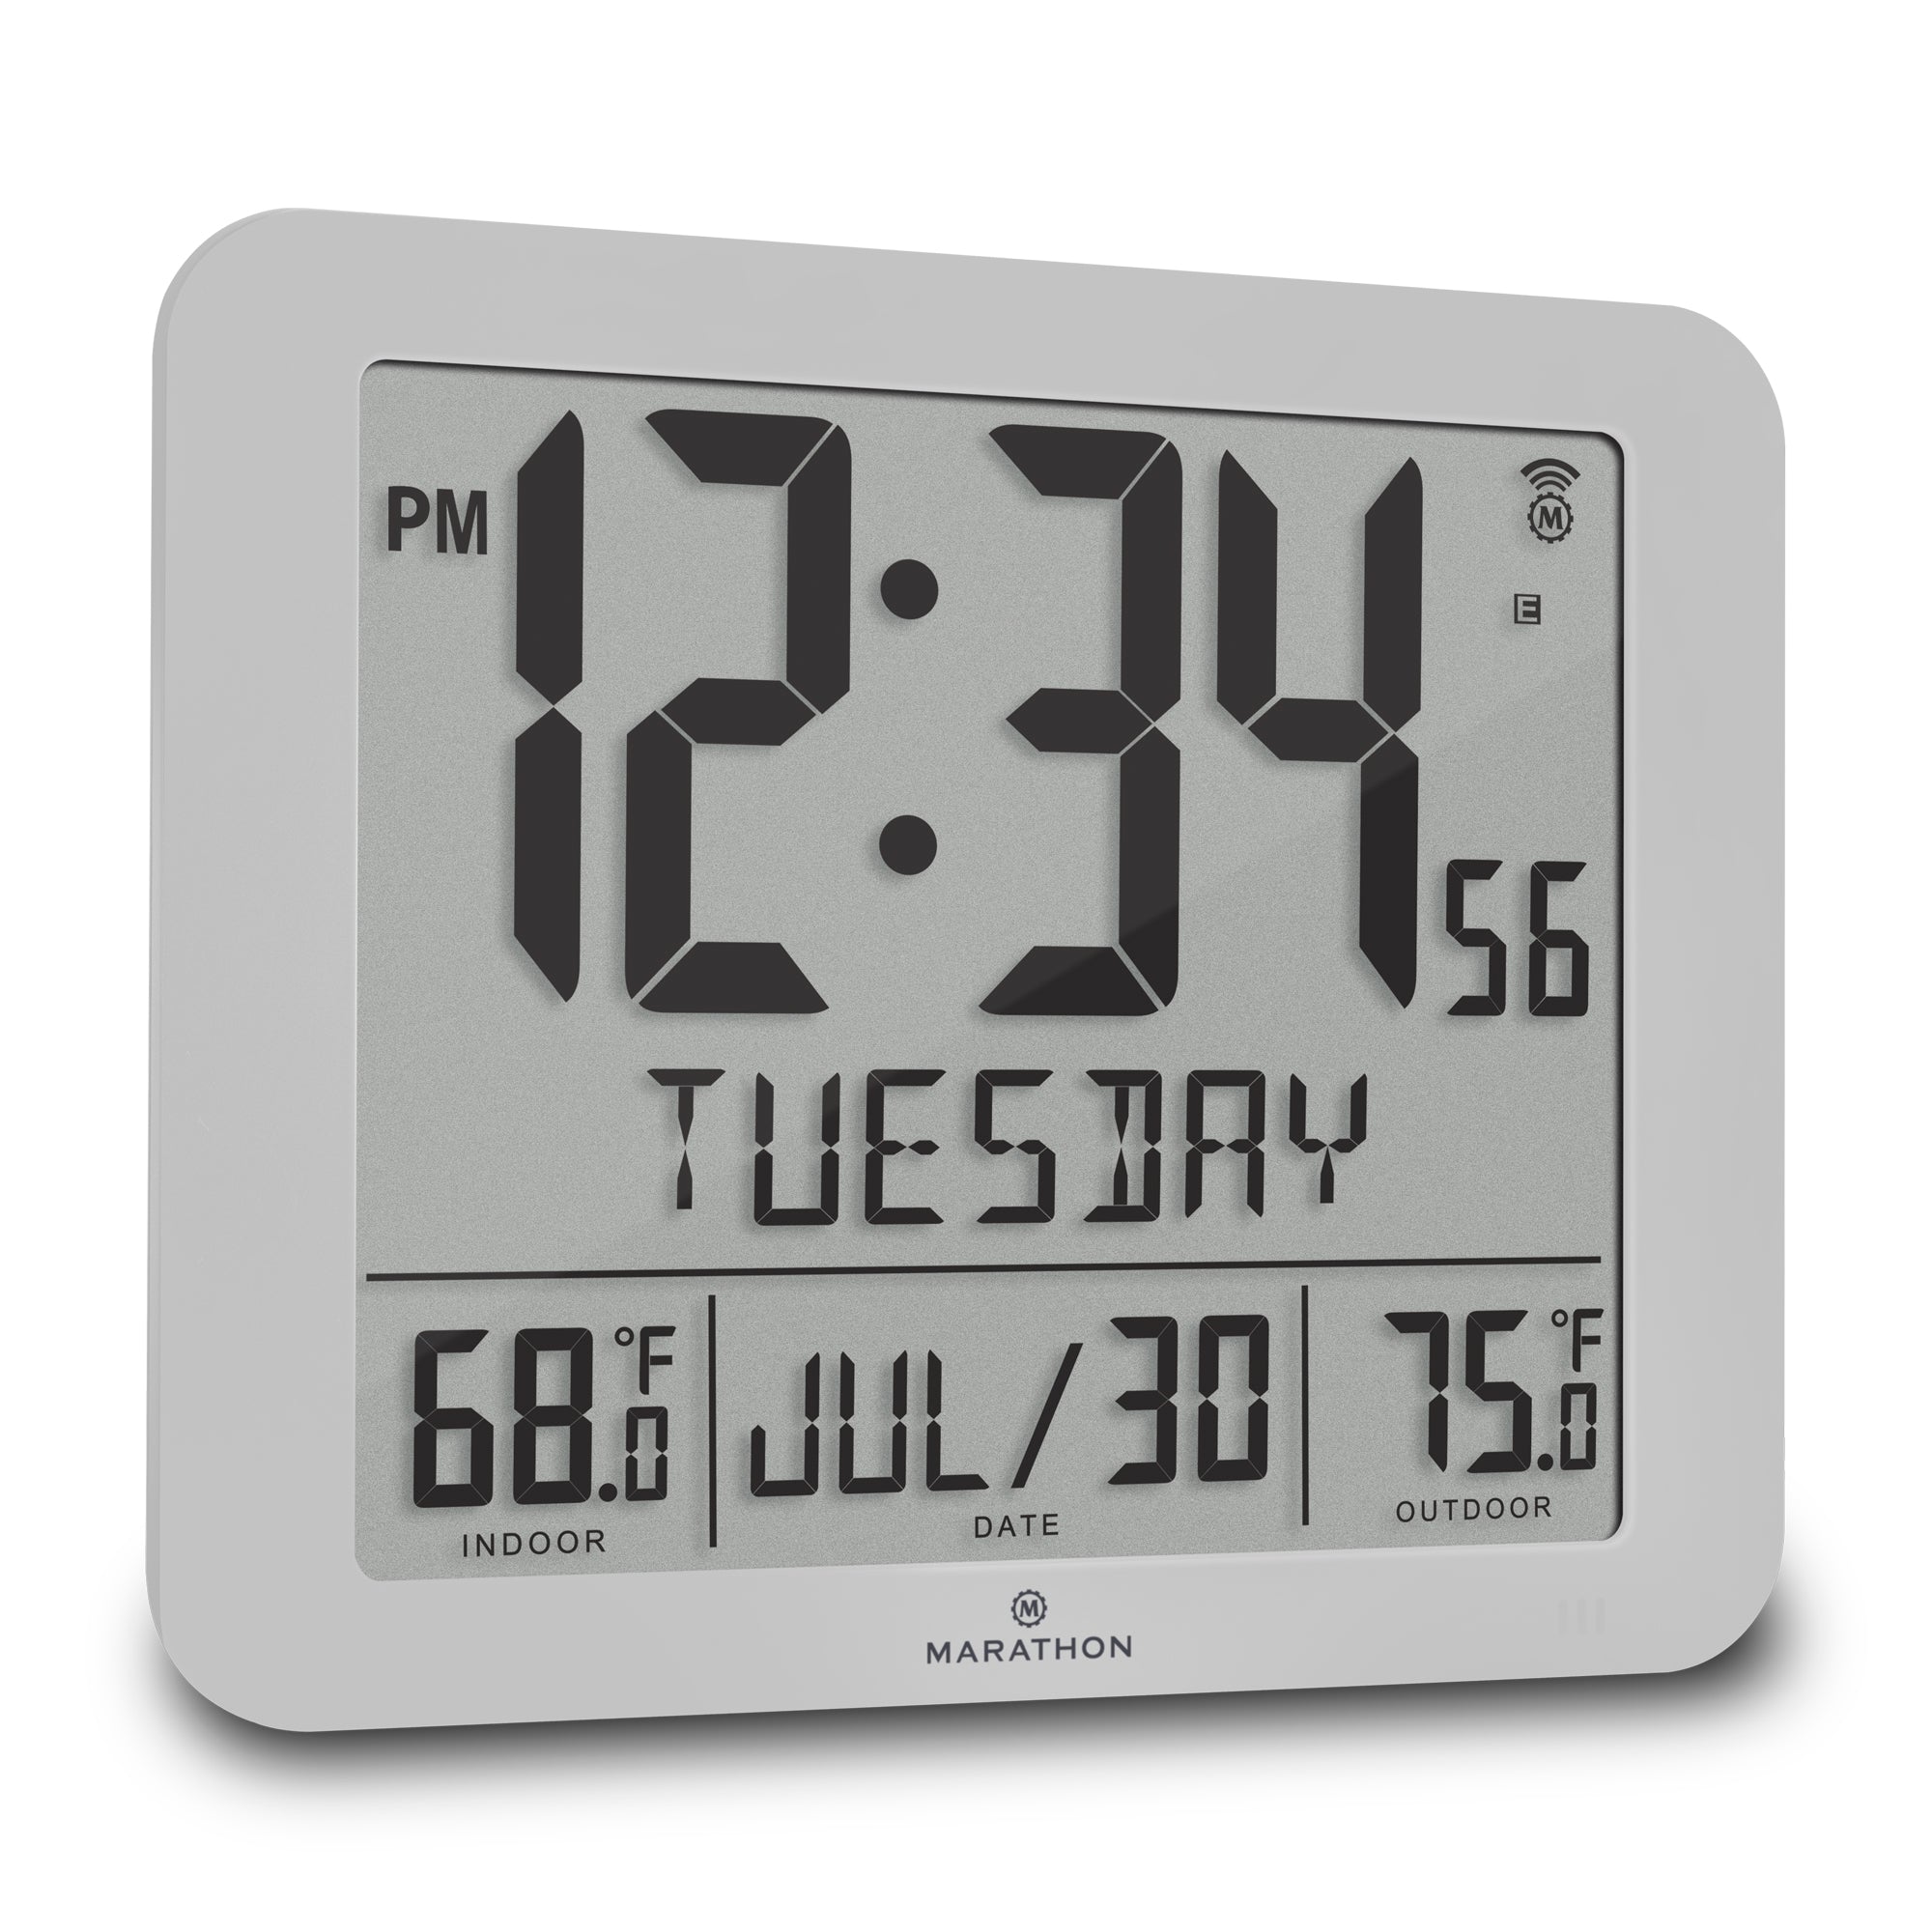 Indoor/Outdoor Atomic Analog Wall Clock with Temperature and